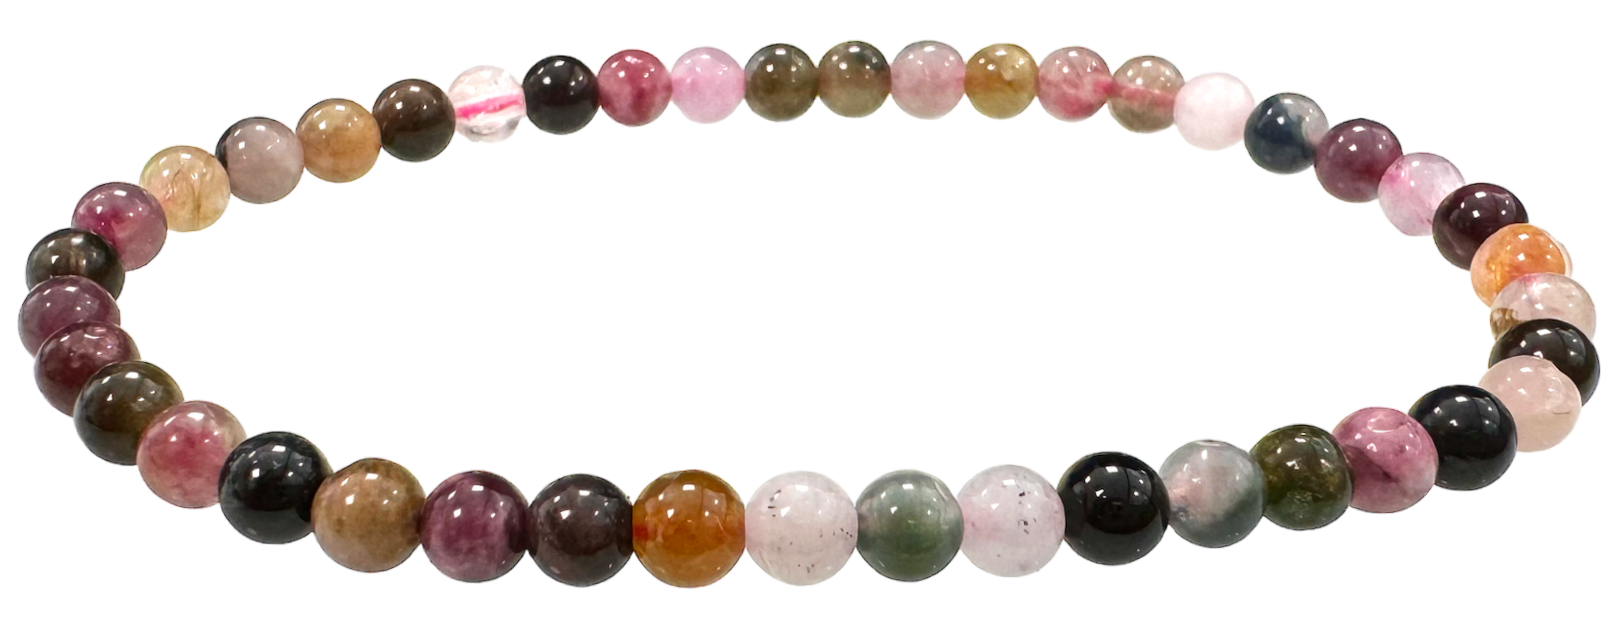 Multicolored Tourmaline Bracelet With 4mm beads